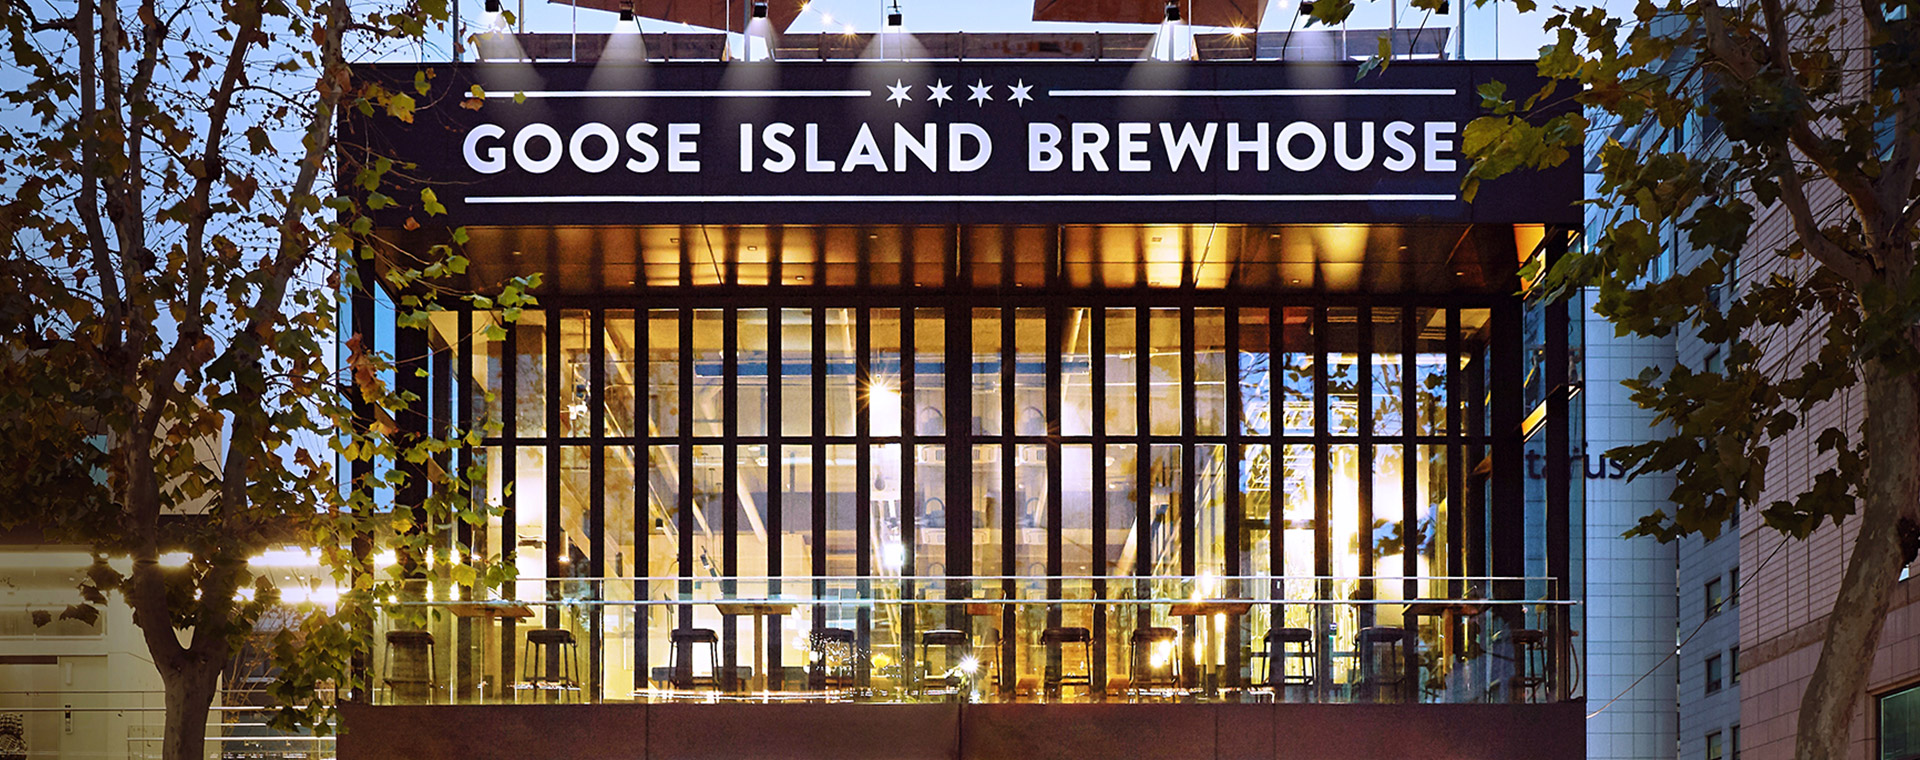 GOOSE ISLAND BREWHOUSE PC SIZE